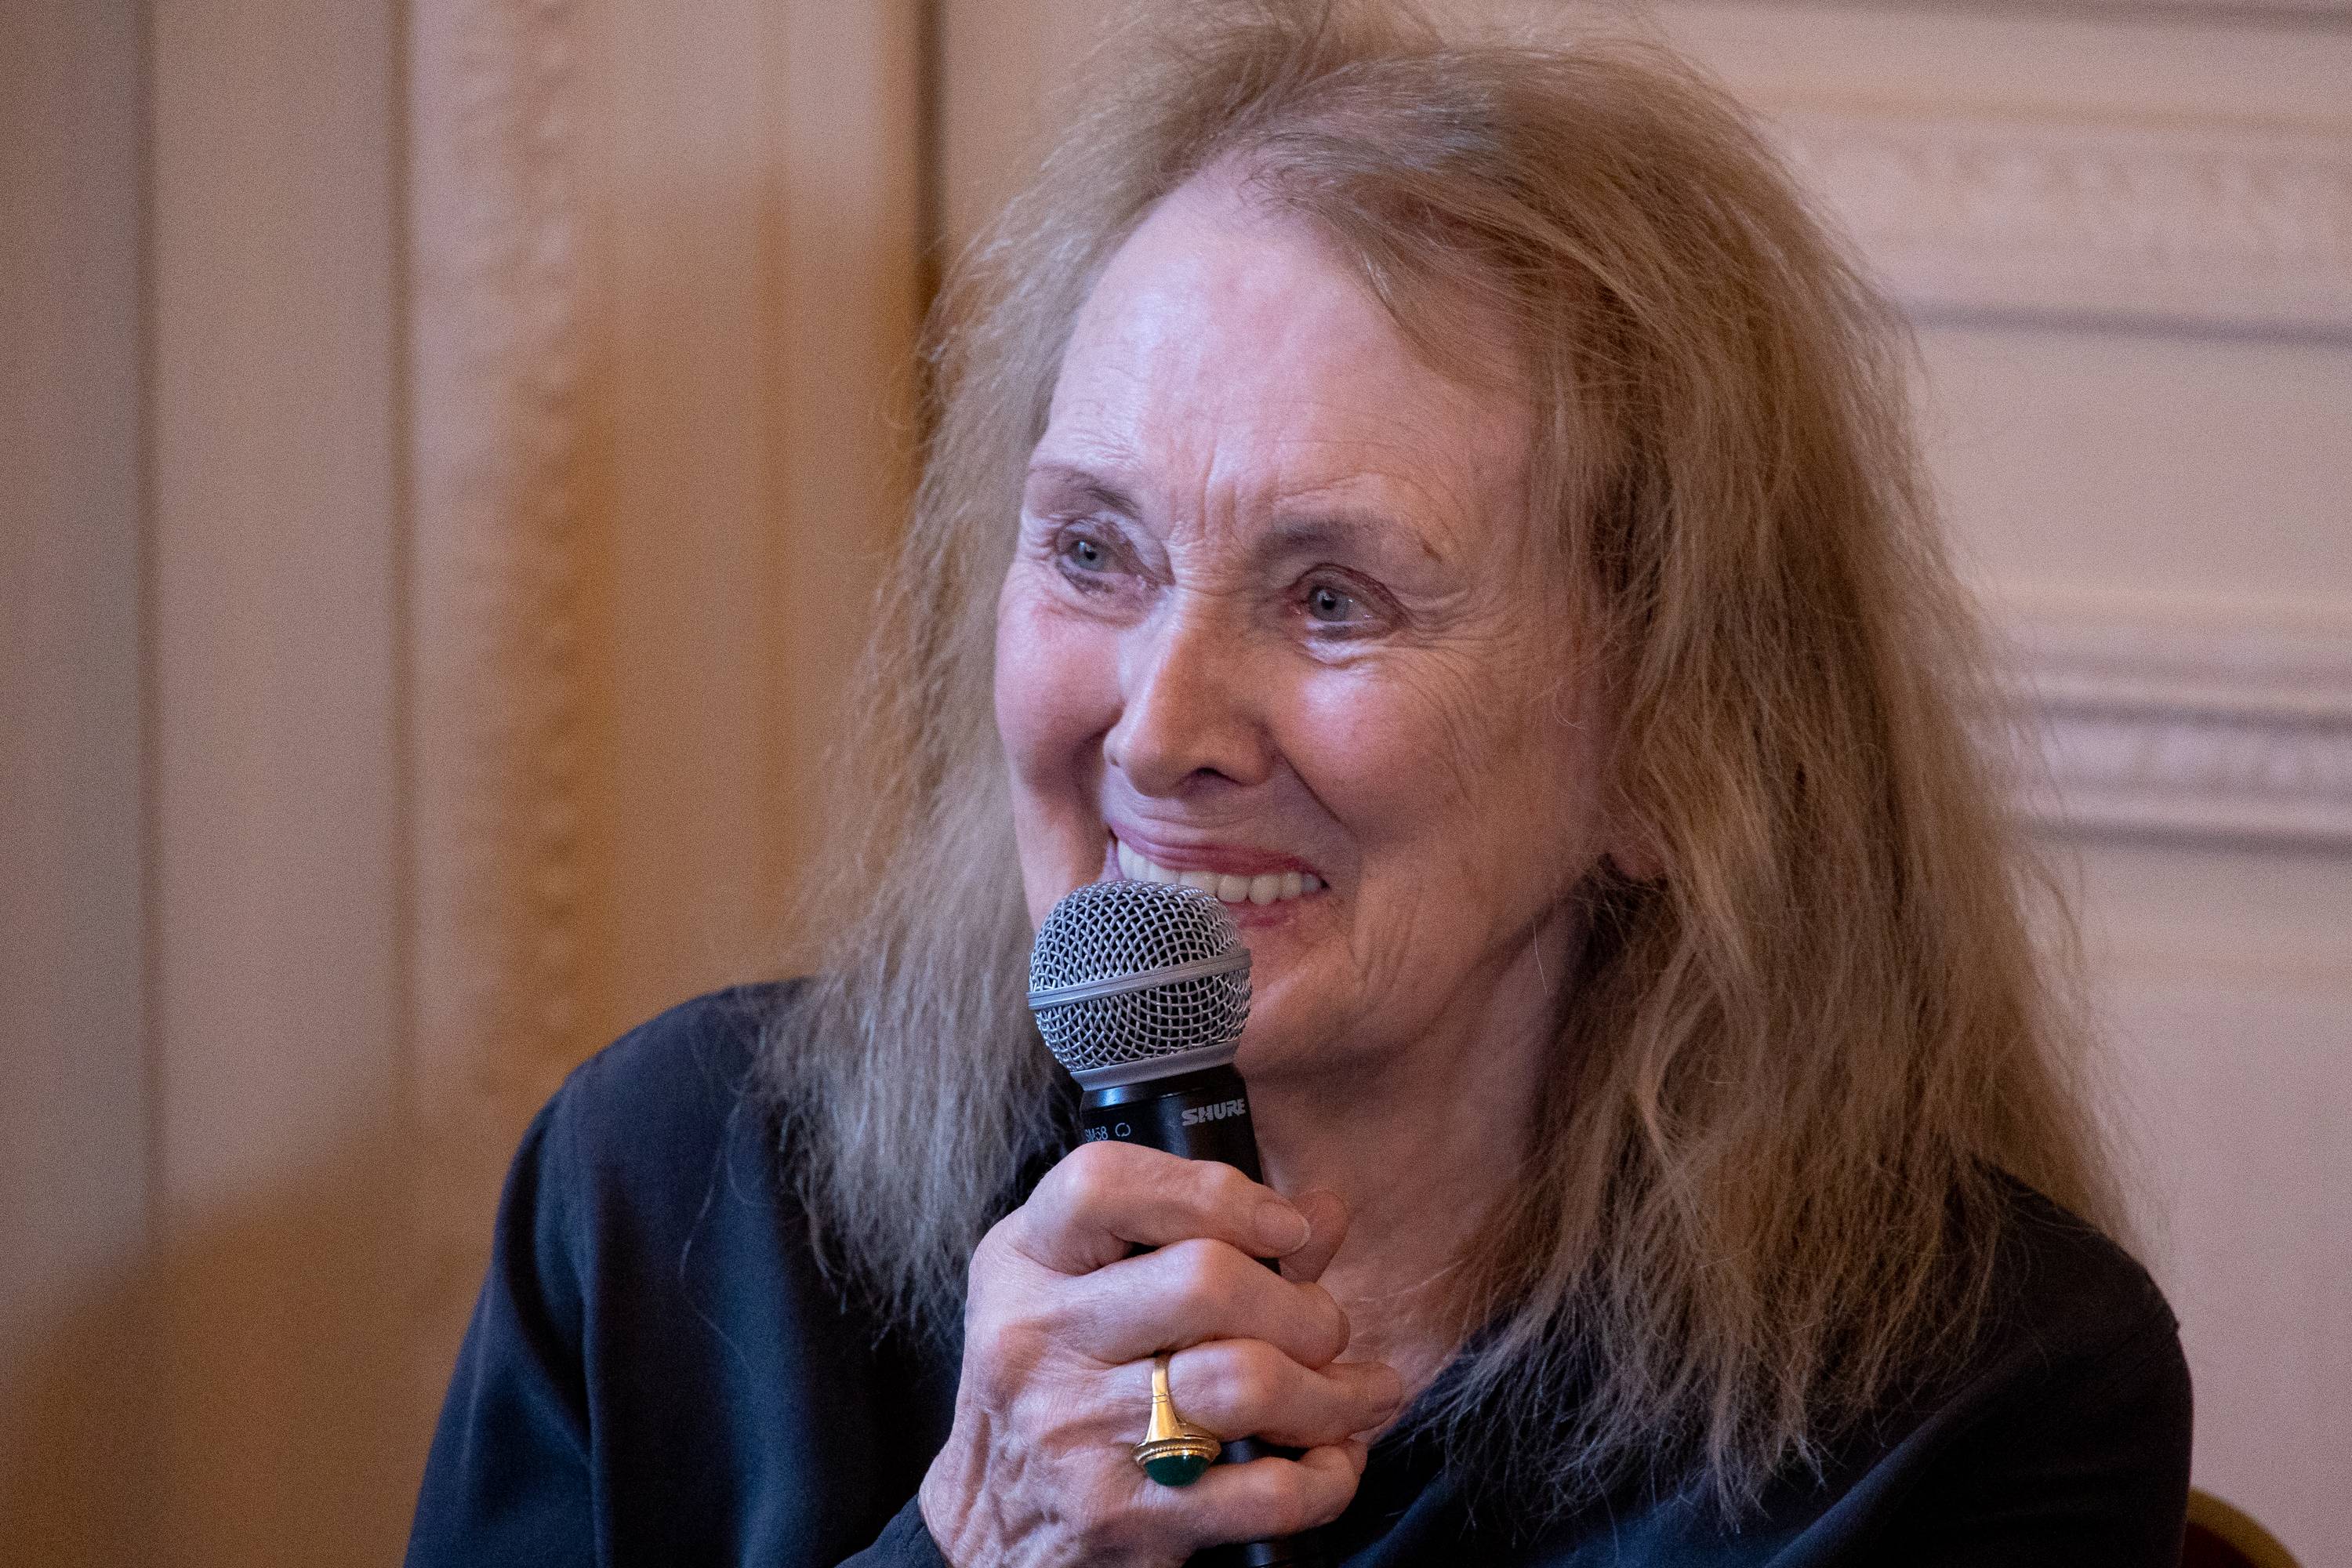 French author Annie Ernaux gives a press conference as she wins Nobel Prize in Literature on October 06, 2022 in Paris, France. She was cited for the courage and clinical acuity with which she uncovers the roots, estrangements and collective restraints of personal memory. Image: Marc Piasecki / Getty Images